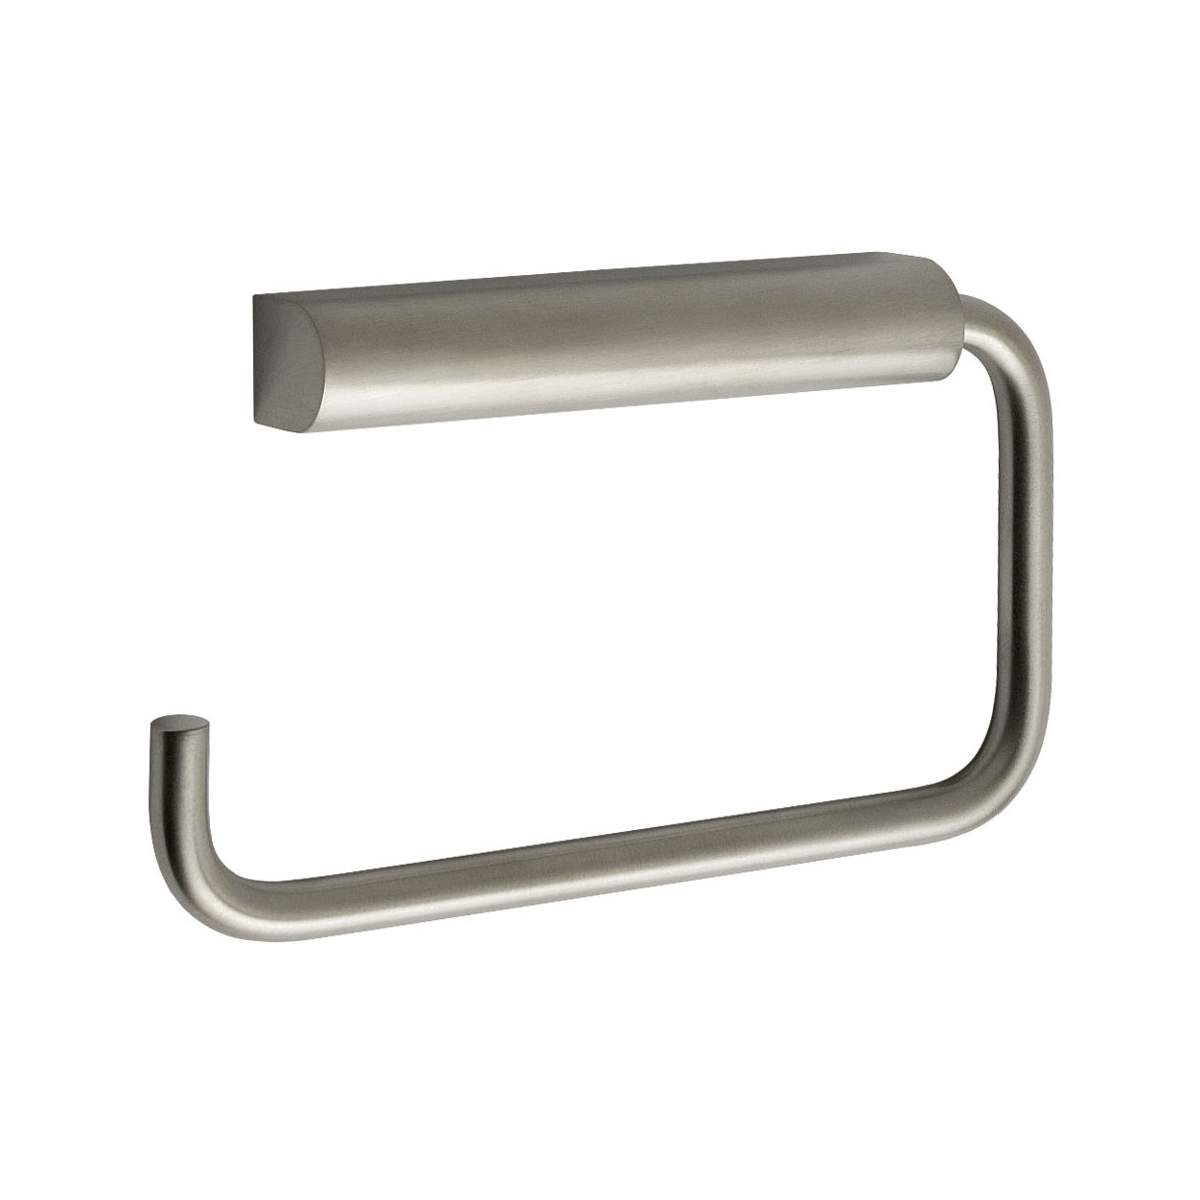 JTP Inox Toilet Wall Mounted Paper Holder